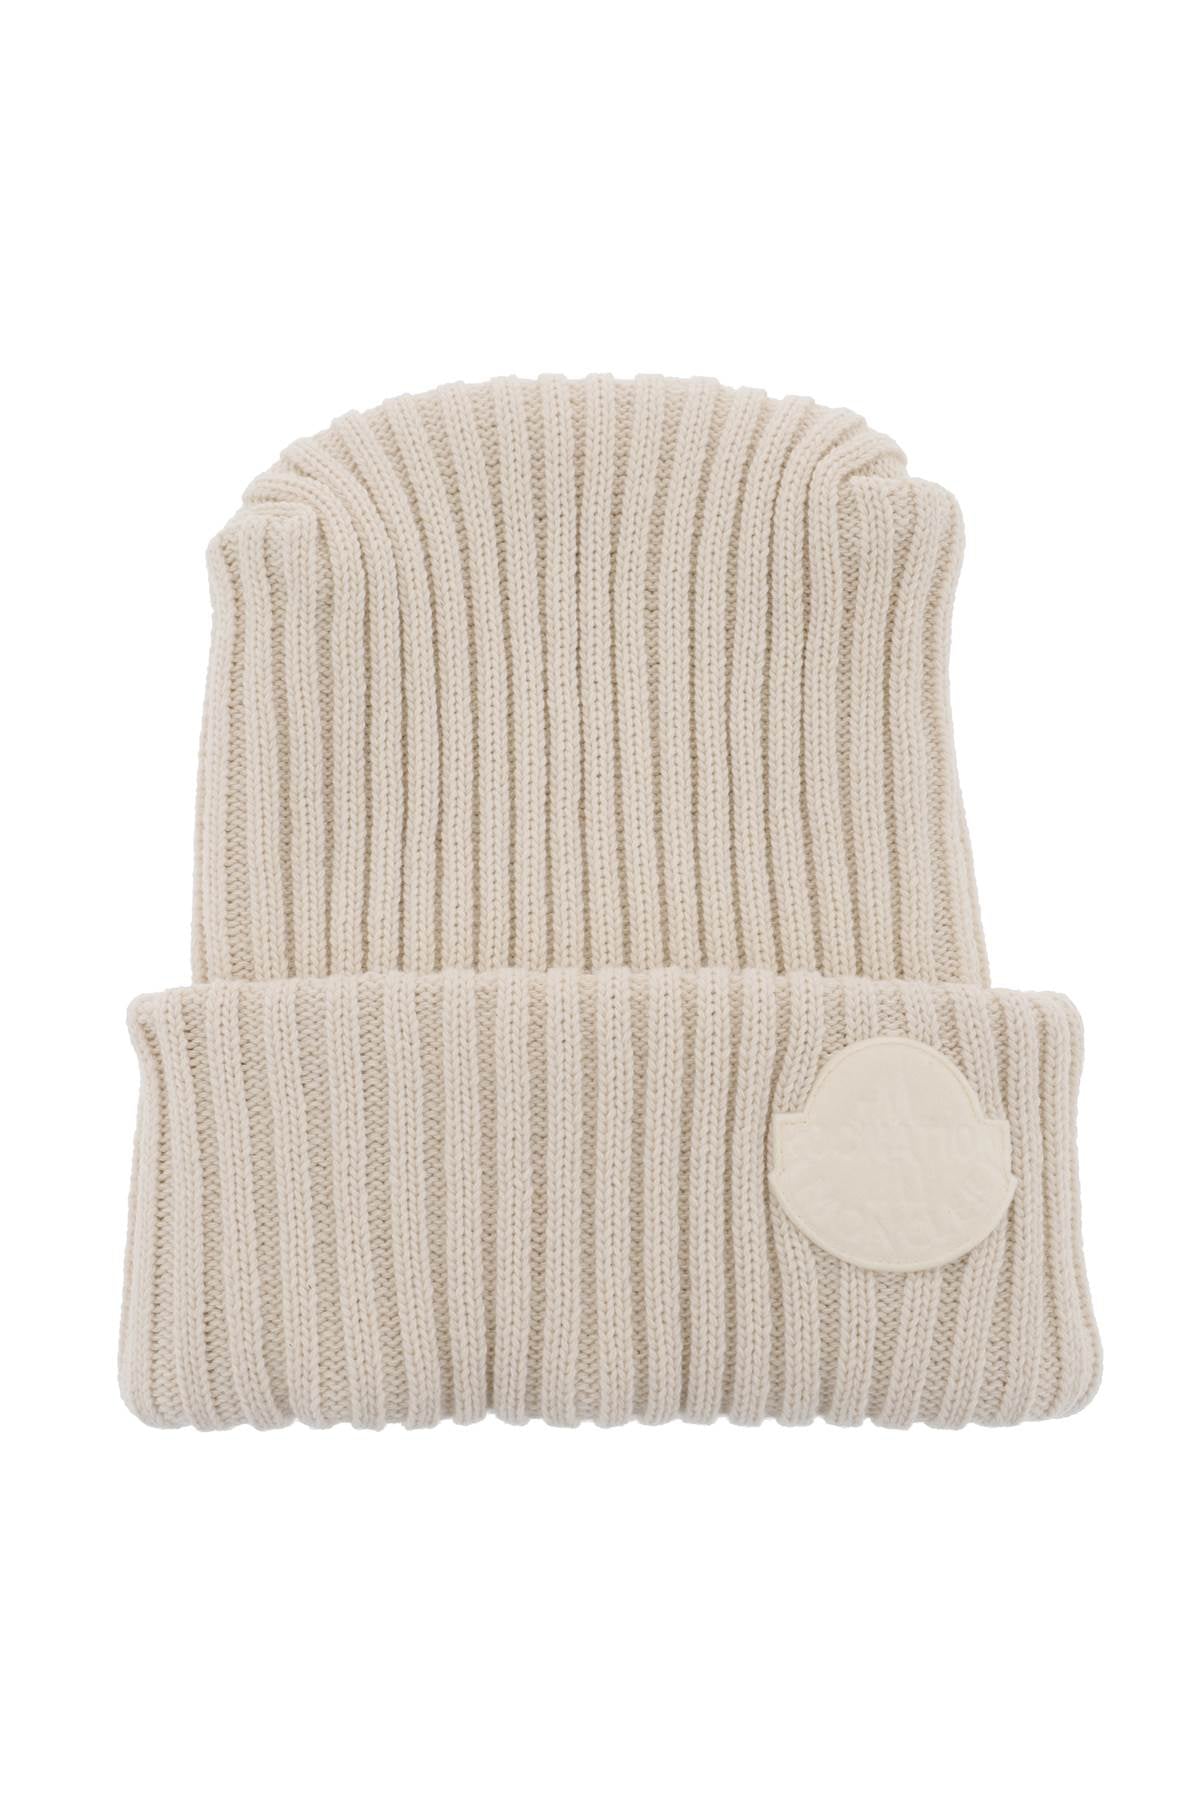 Moncler x roc nation by jay-z tricot beanie hat-0